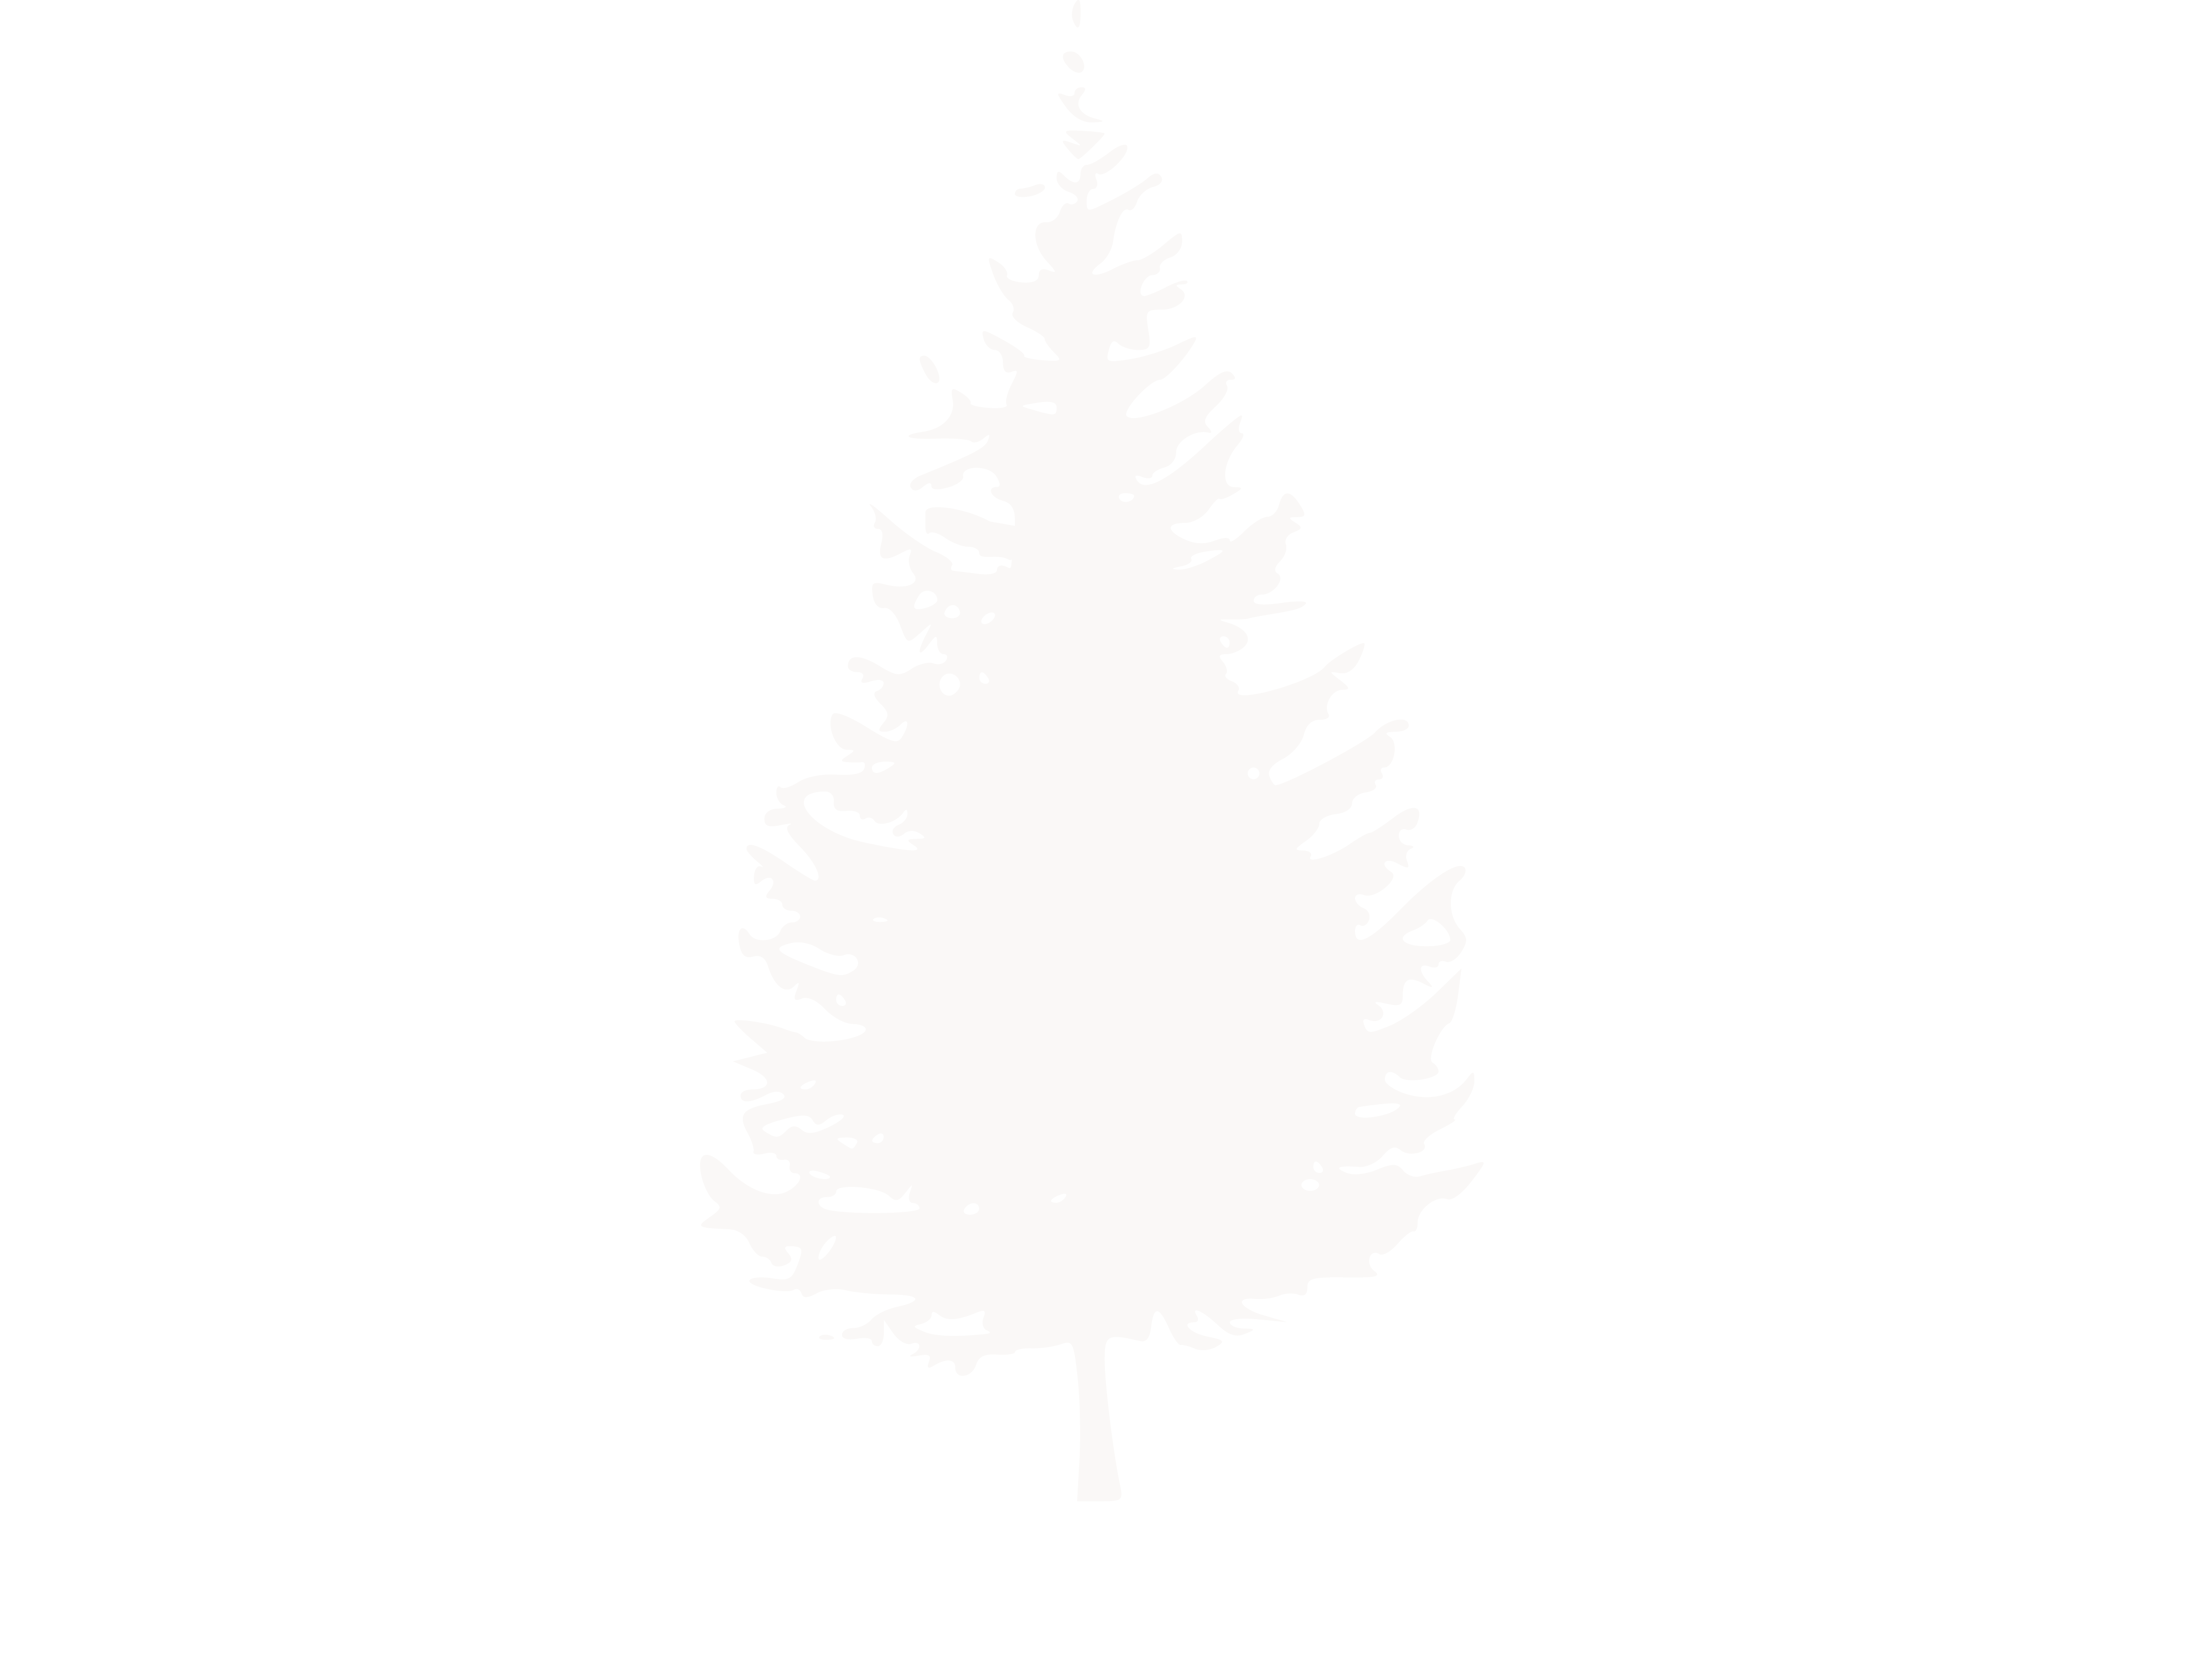 HighNorth Productions